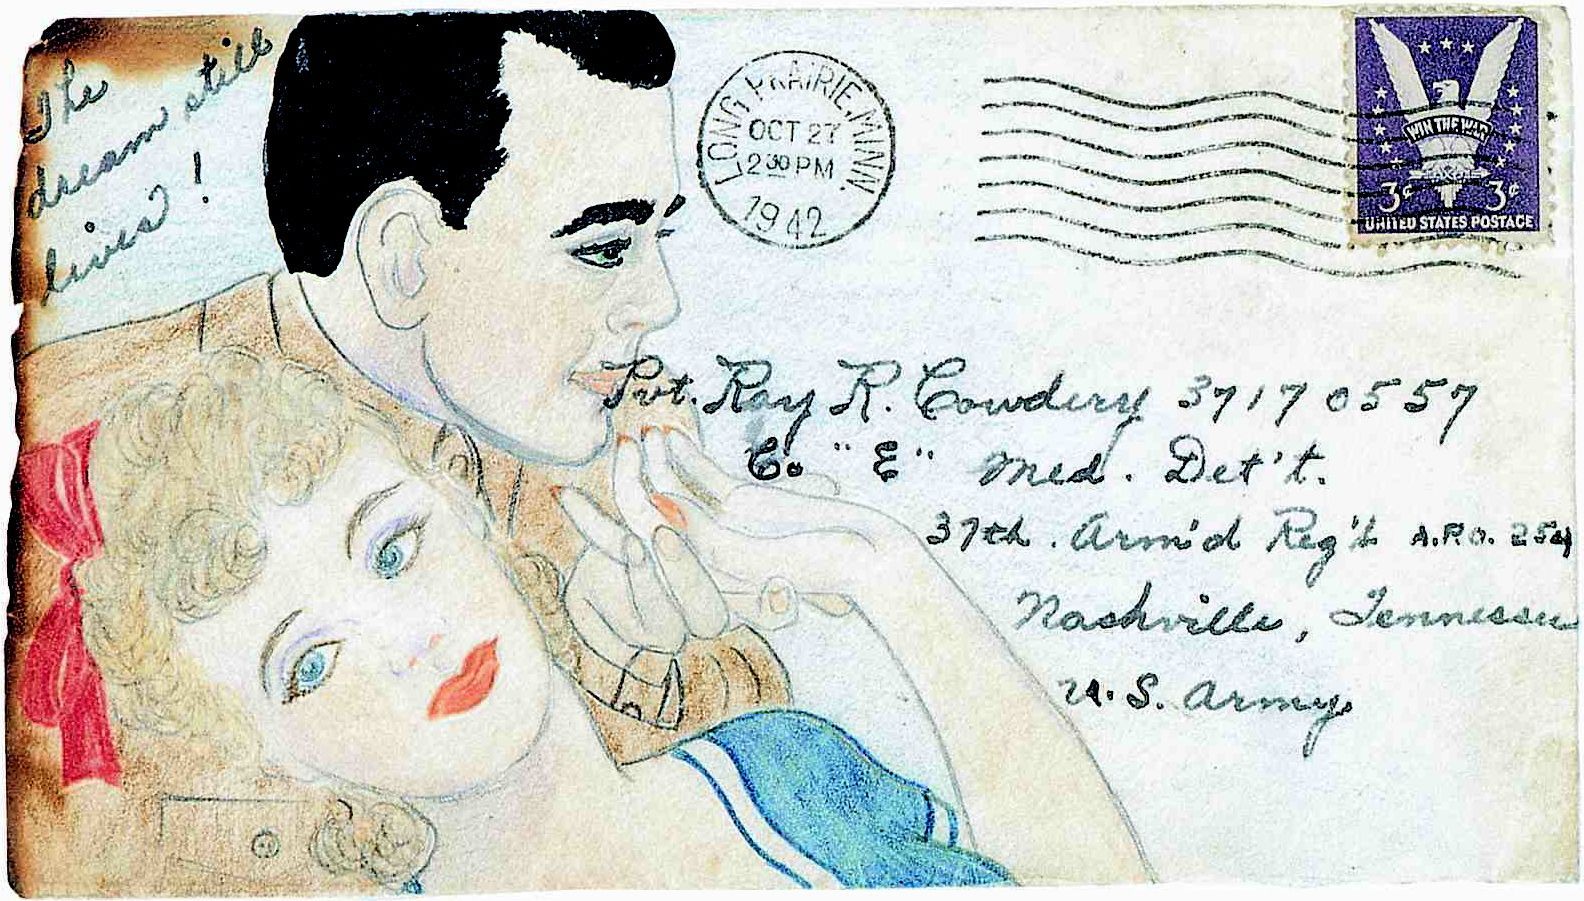 Cecile Cowdery drew on the envelopes of letters to her husband during WW2: &quot